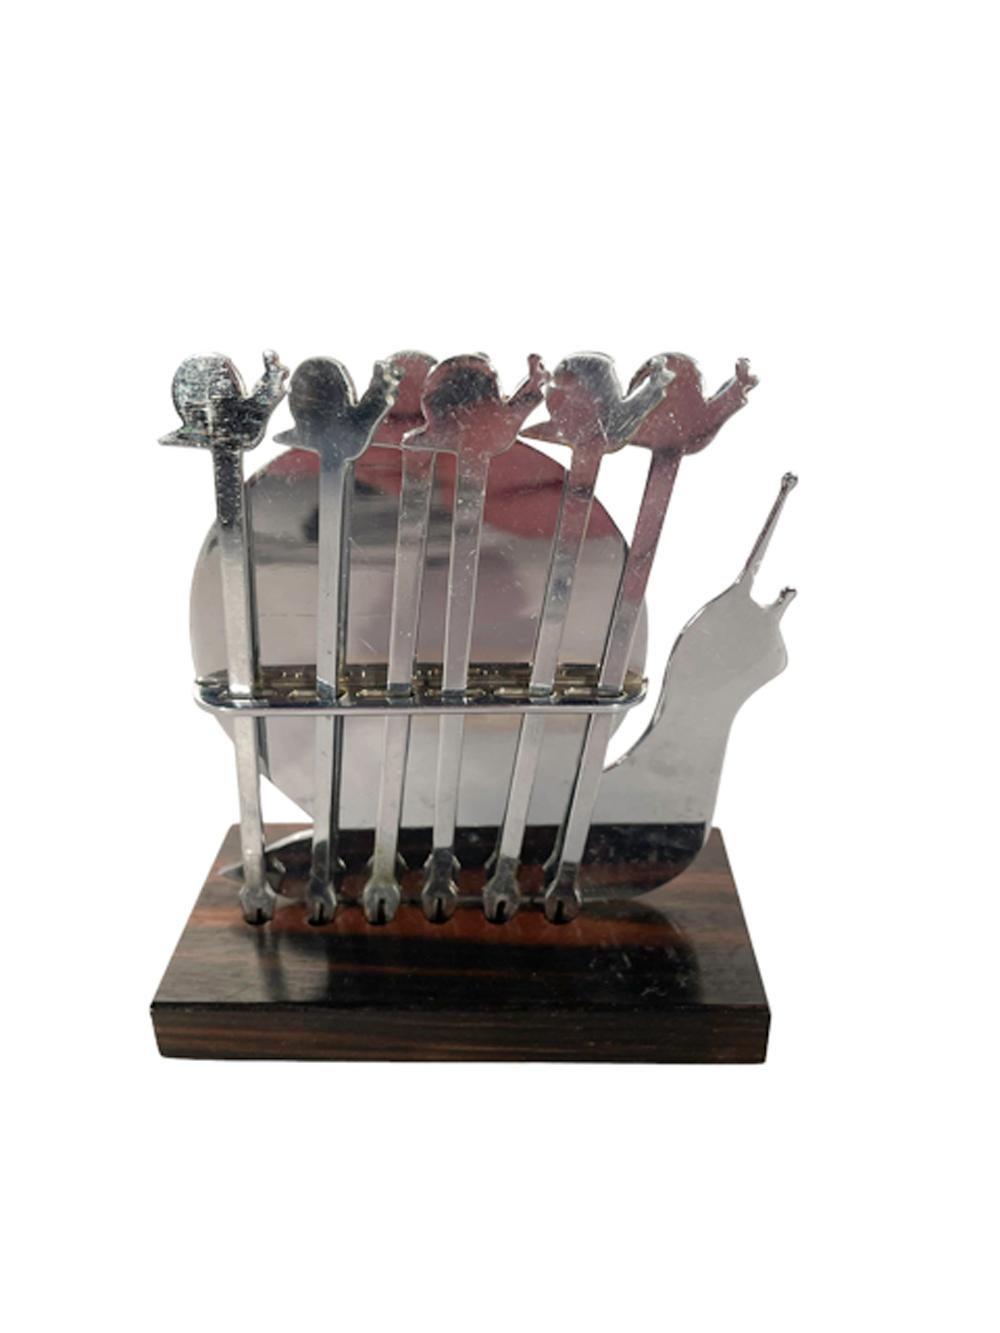 Art Deco Chrome Cocktail Picks and Stand, Snail Form Holder w/Snail Topped Picks In Good Condition For Sale In Nantucket, MA